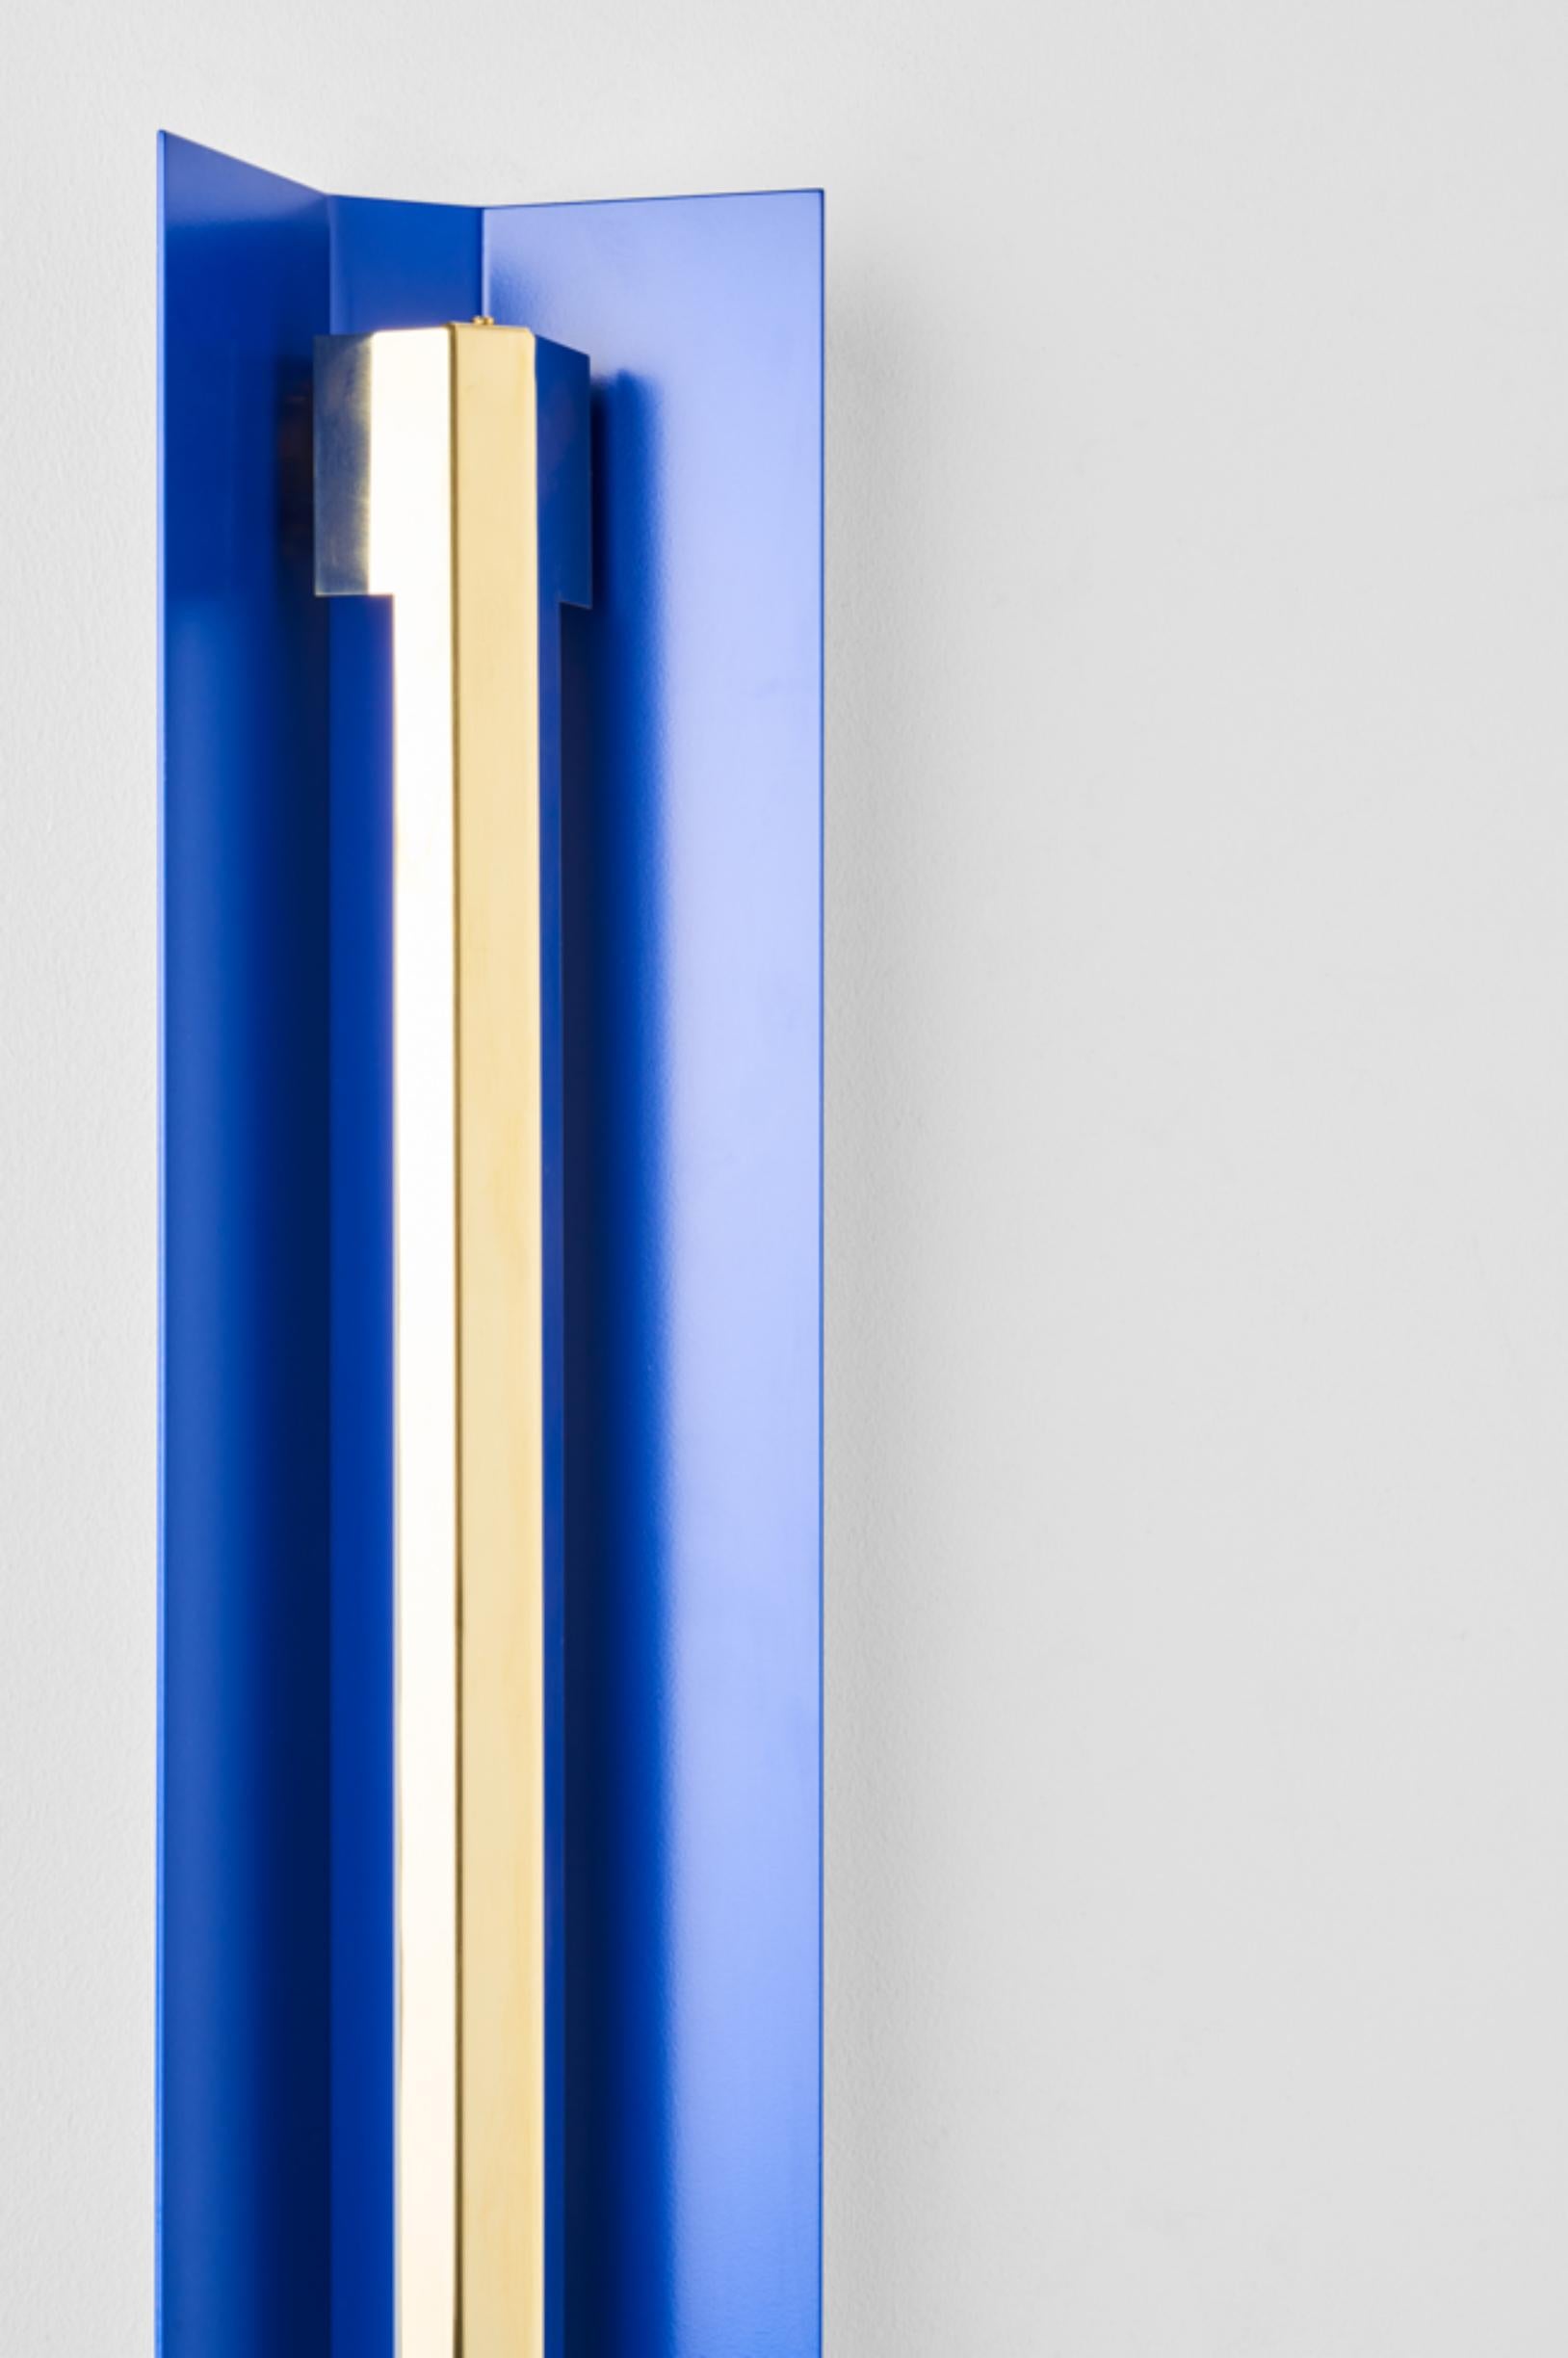 Large Misalliance Ex ultramarine wall light by Lexavala
Dimensions: D 16 x W 130 x H 8 cm
Materials: powder coated shade with details made of brass or stainless steel.

There are two lenghts of socket covers, extending over the LED. Two short